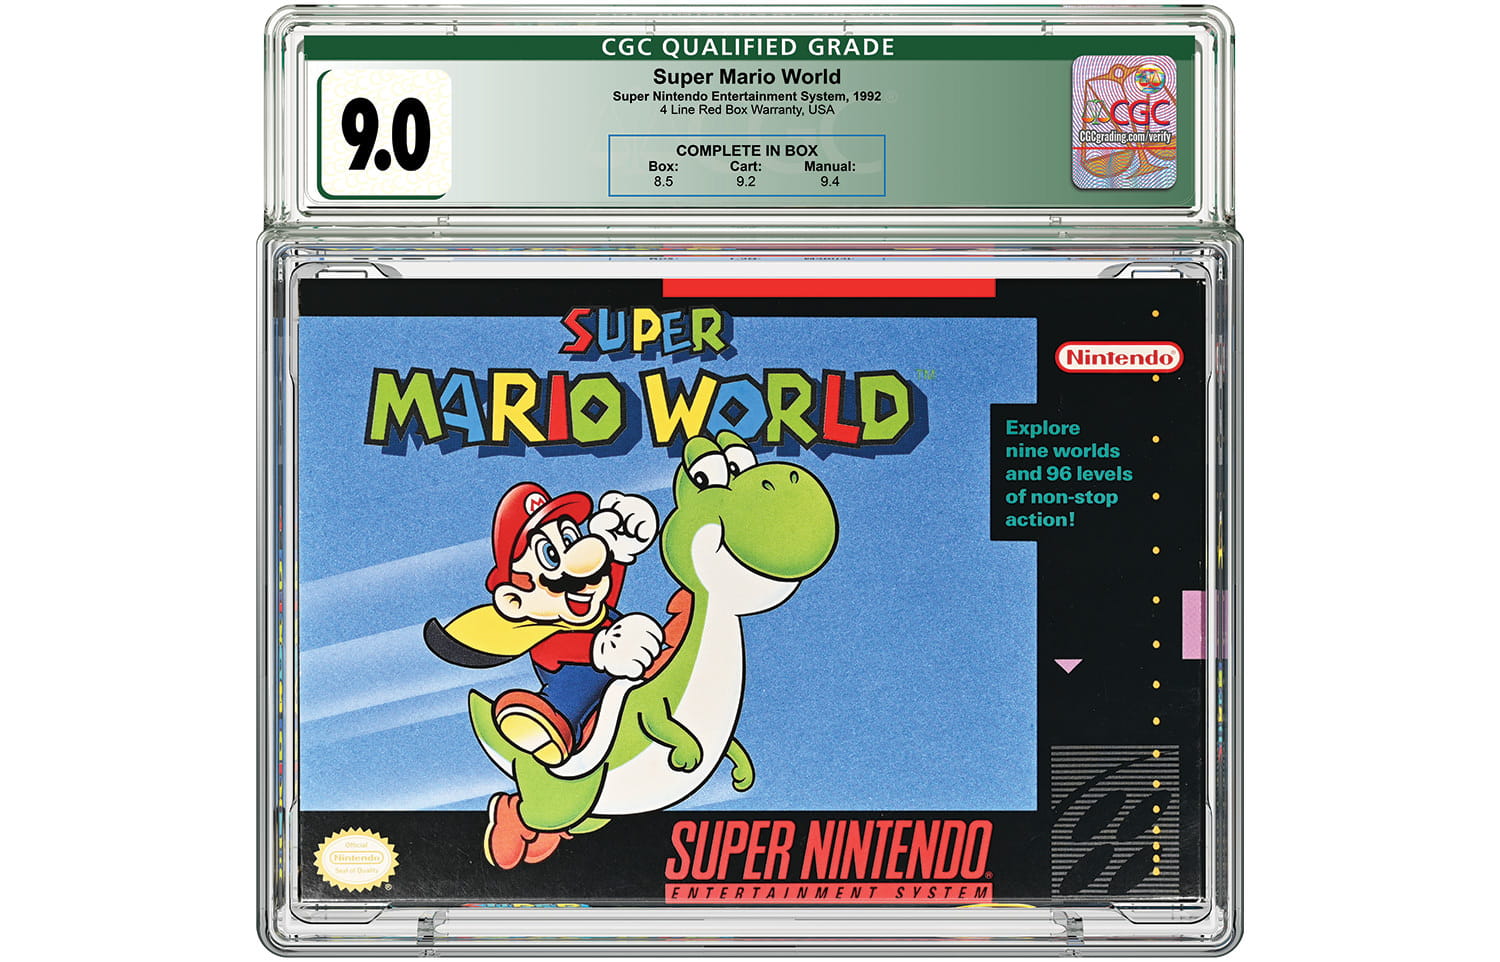 CGC graded Mario World video game with a green Qualified label